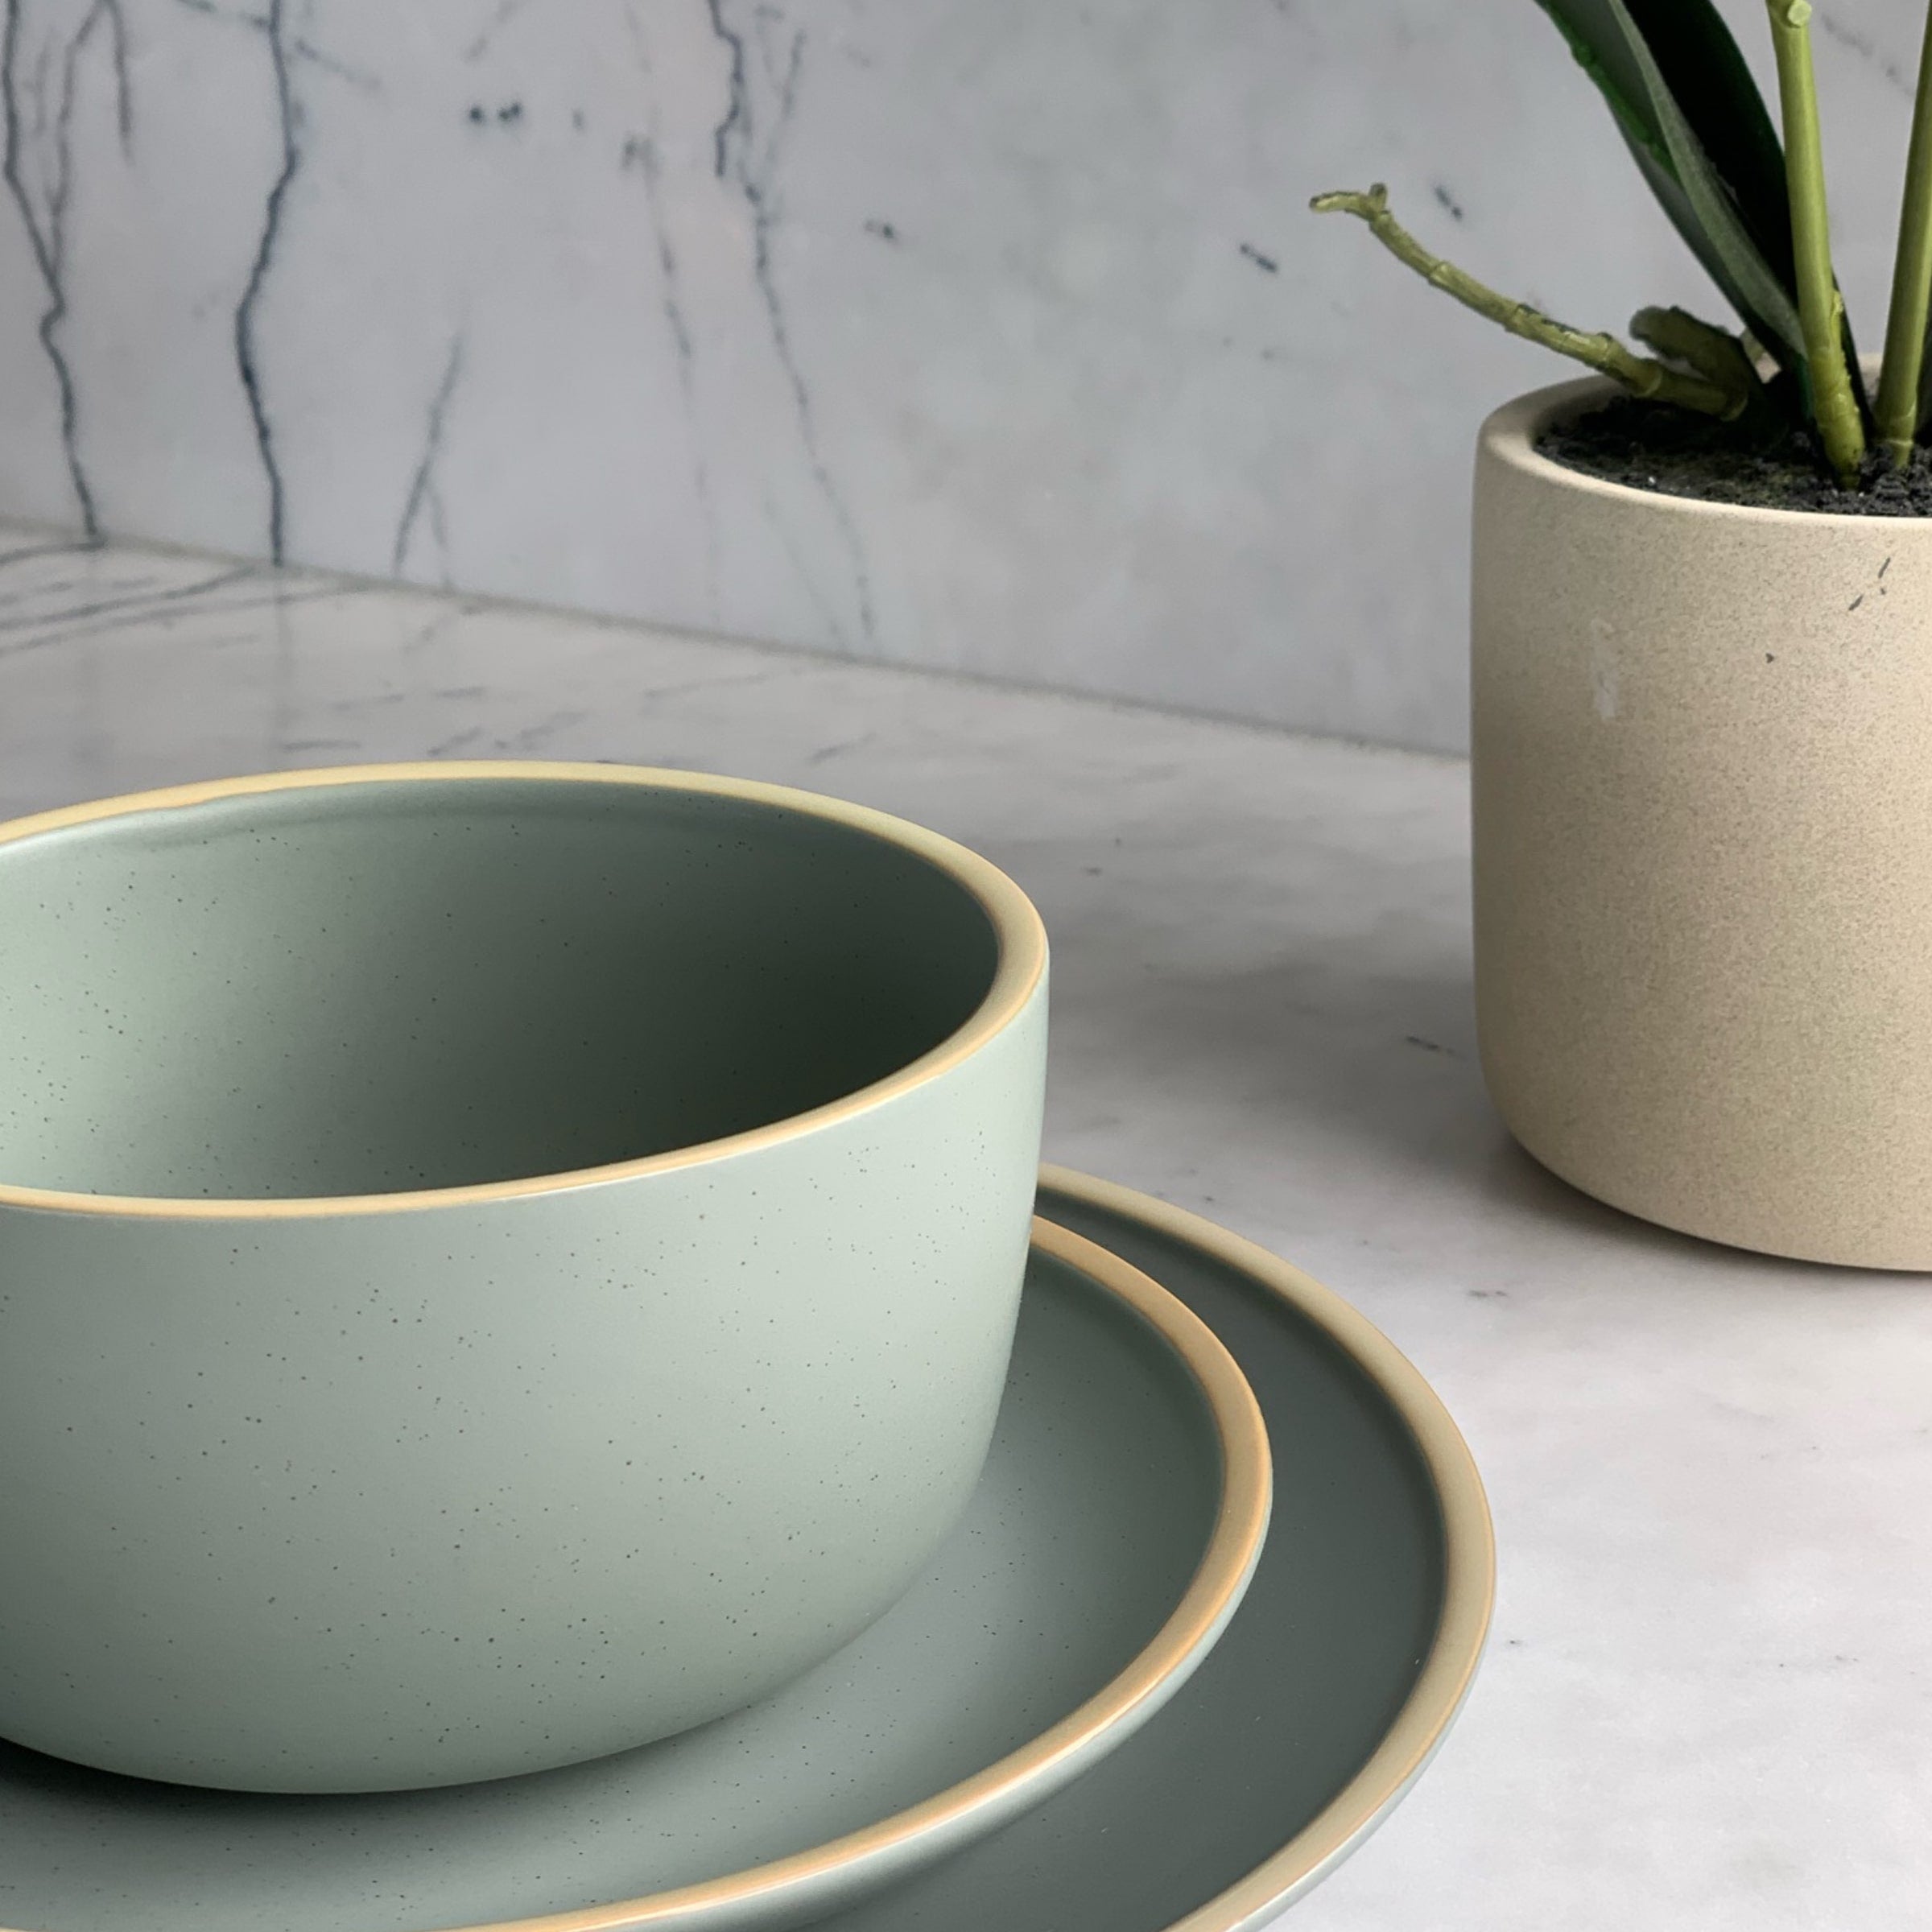 Hall Dinner Bowl - Green - Buy Bowls Online at FRANKY'S